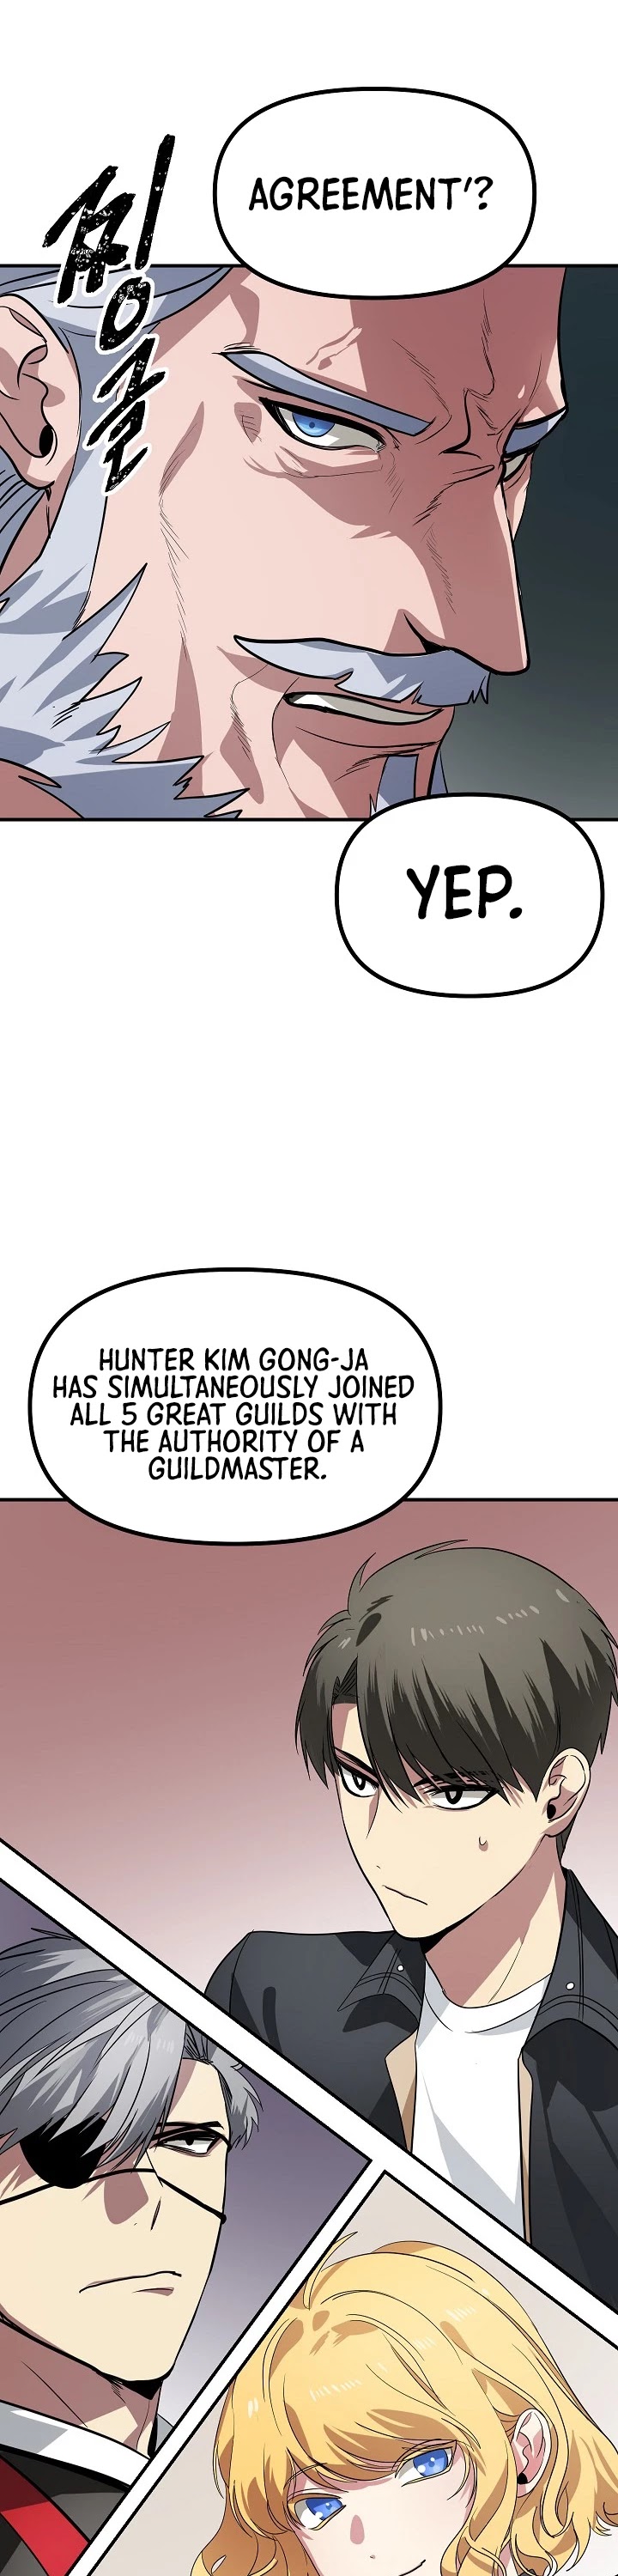 SSS-Class Suicide Hunter chapter 22